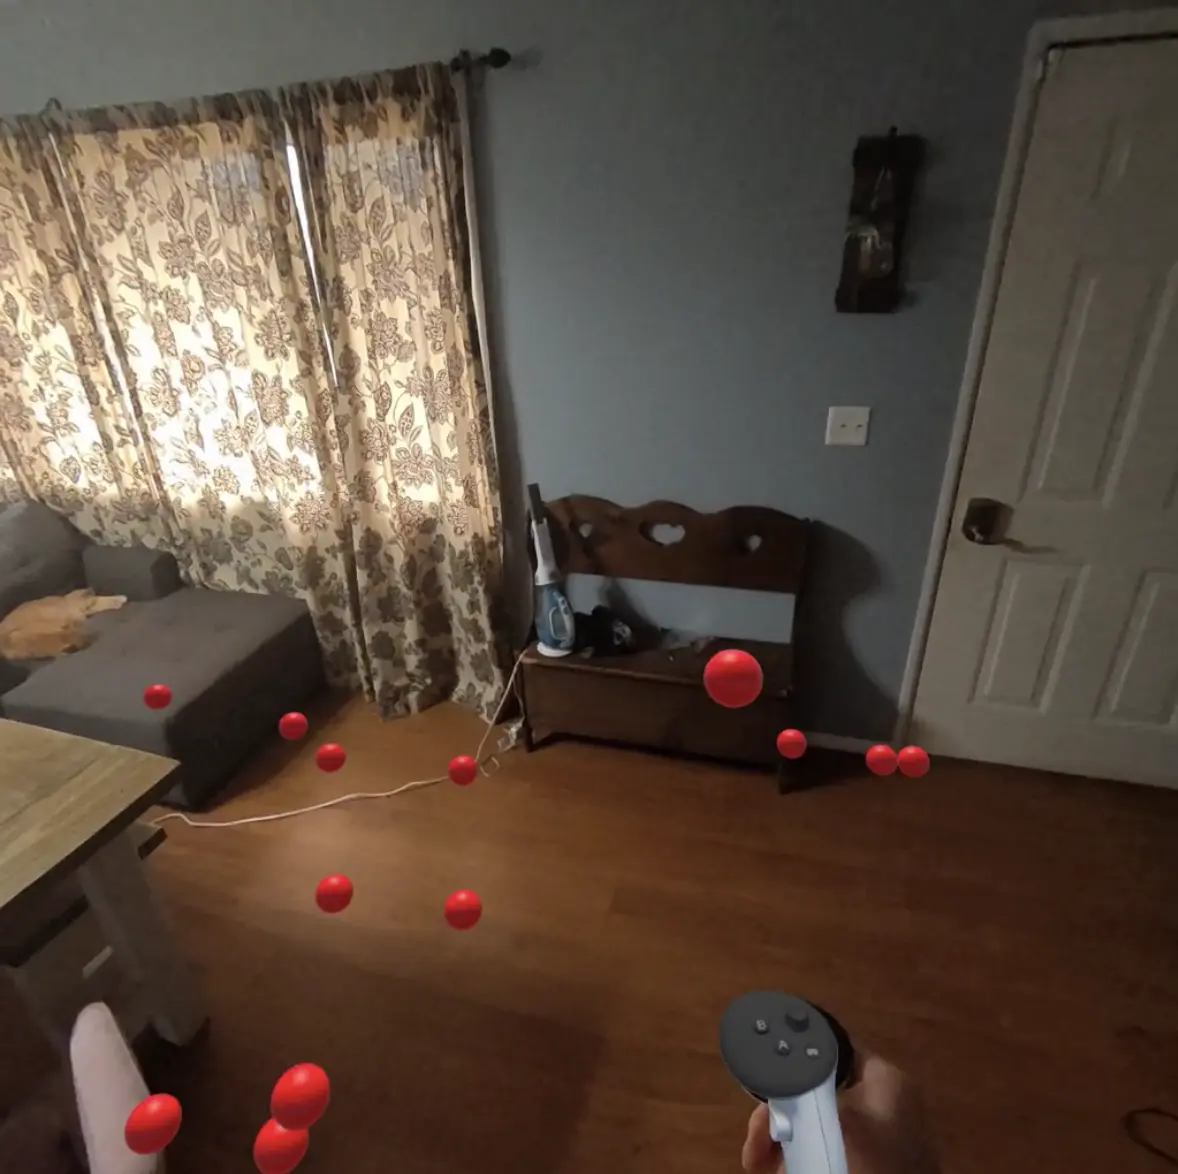 A red ball being shot from a virtual controller